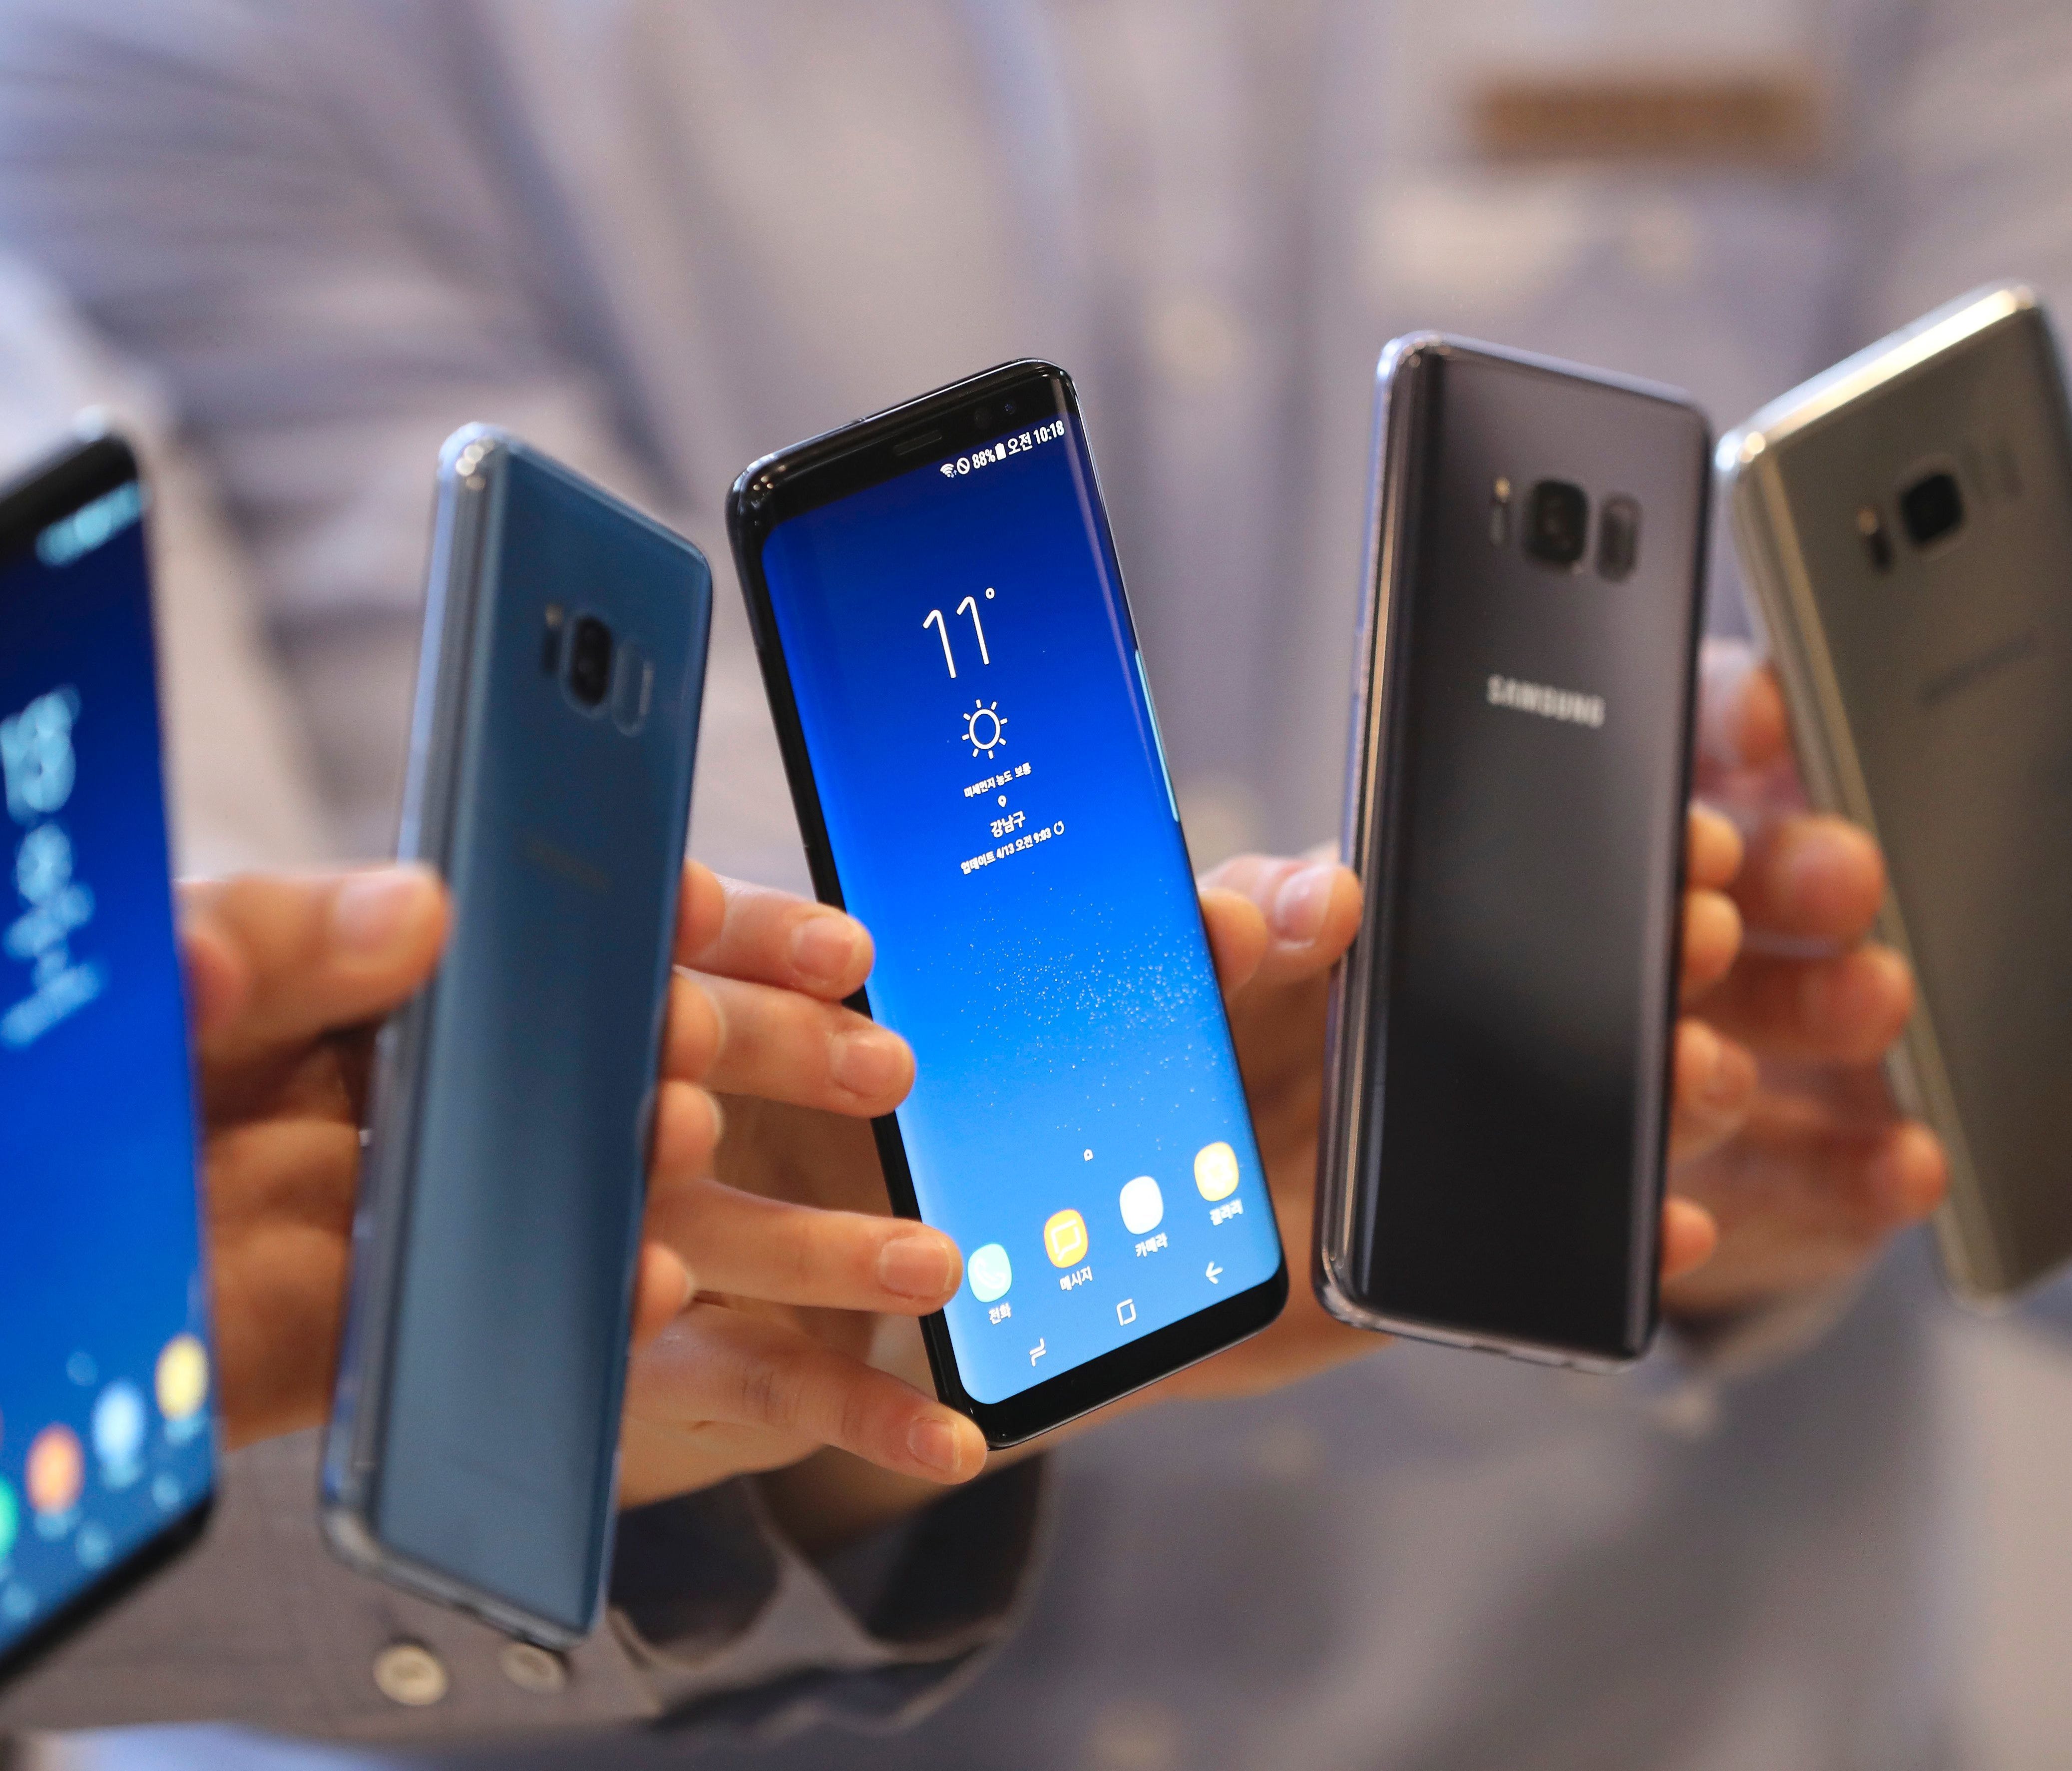 Samsung Electronics' Galaxy S8 and S8+ smartphones